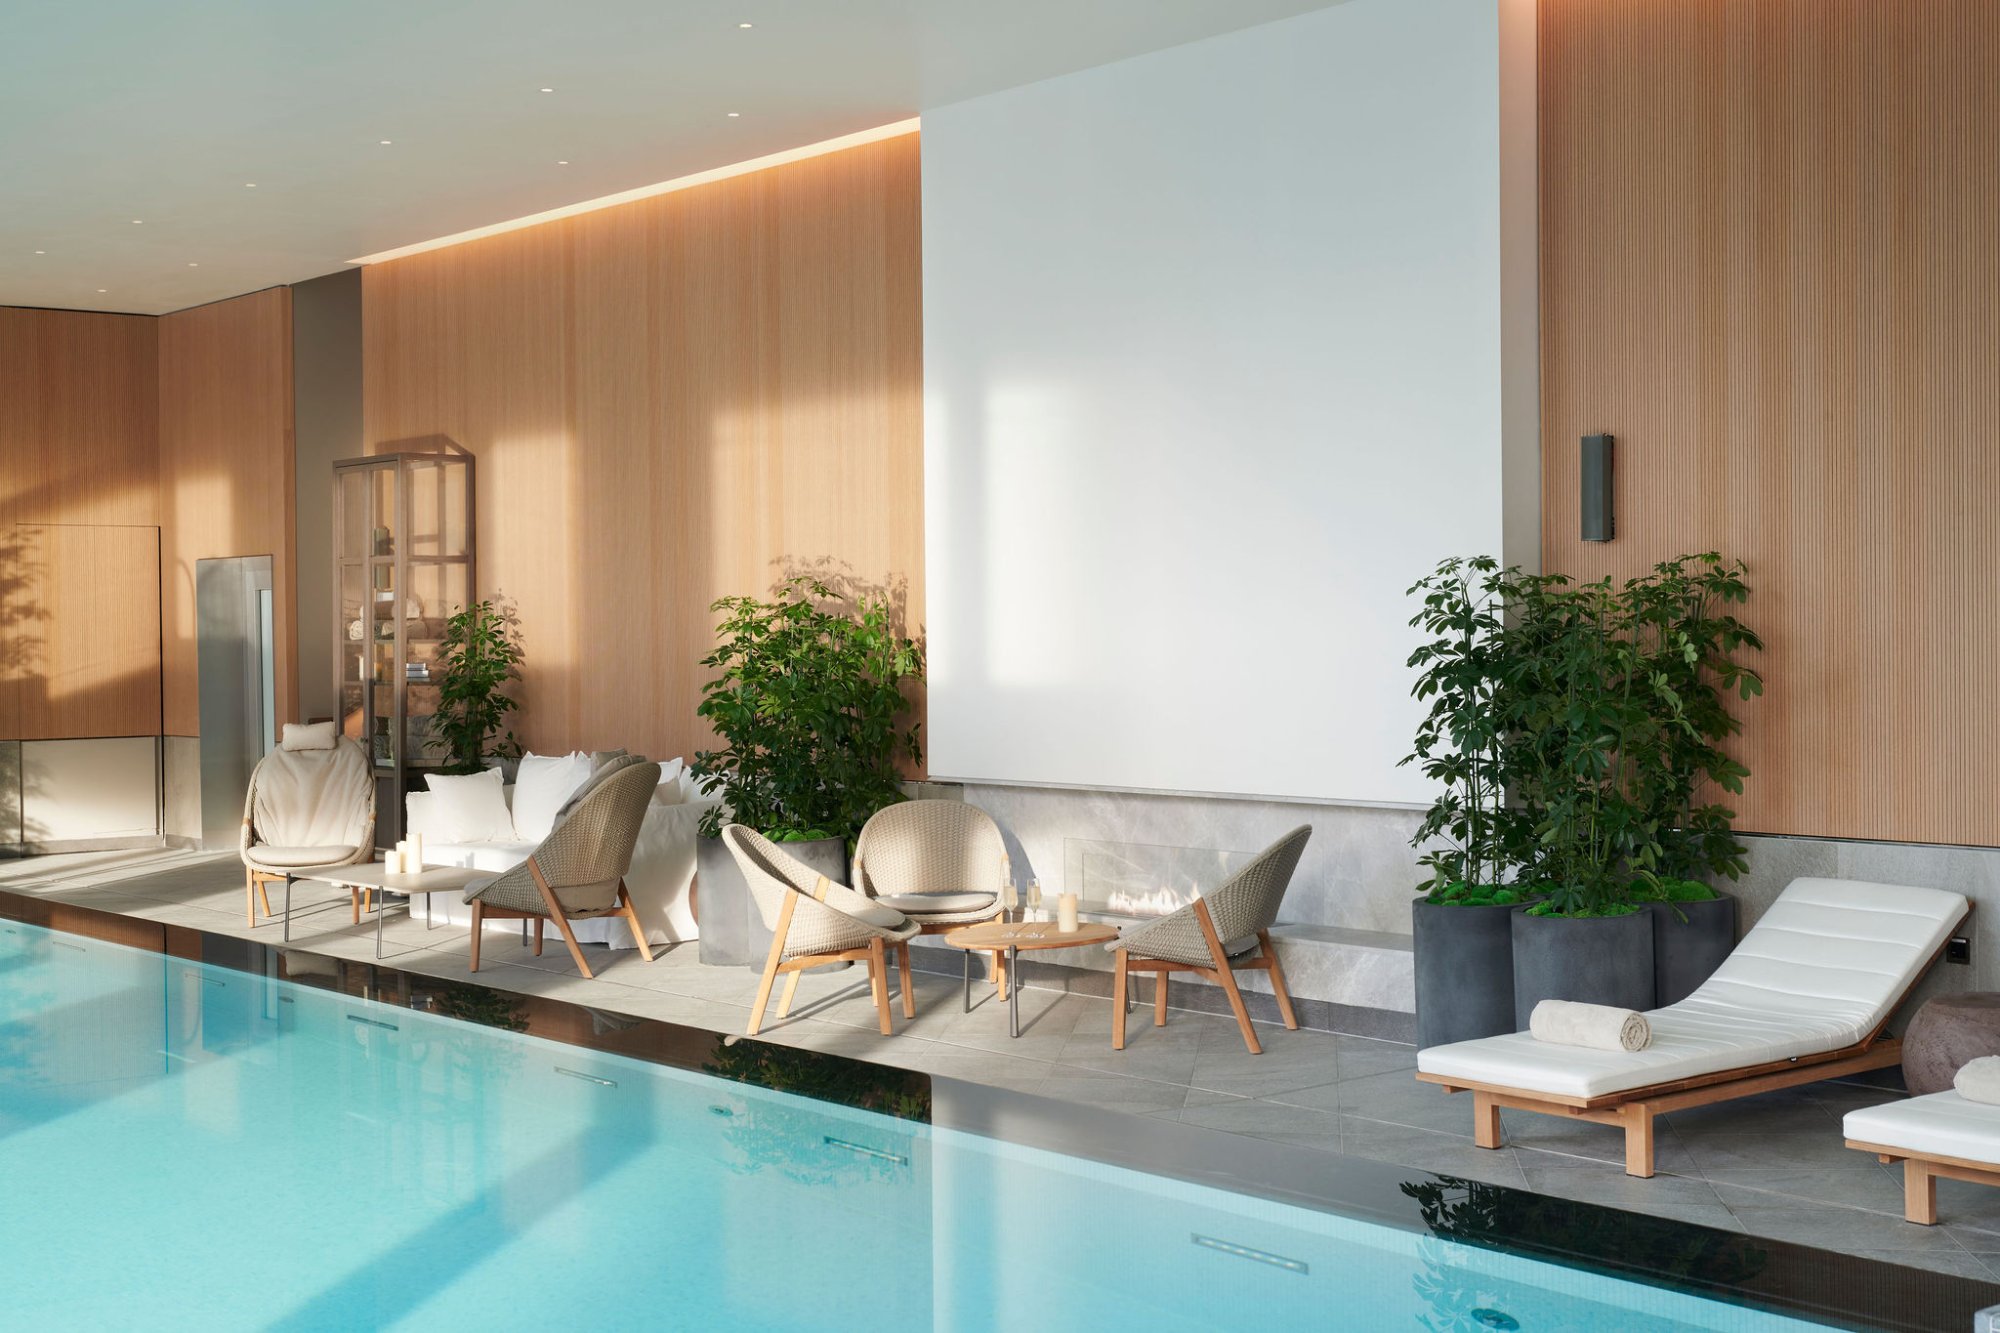 Discover the Sky Residences at One Bishopsgate Plaza in London’s Financial Heart